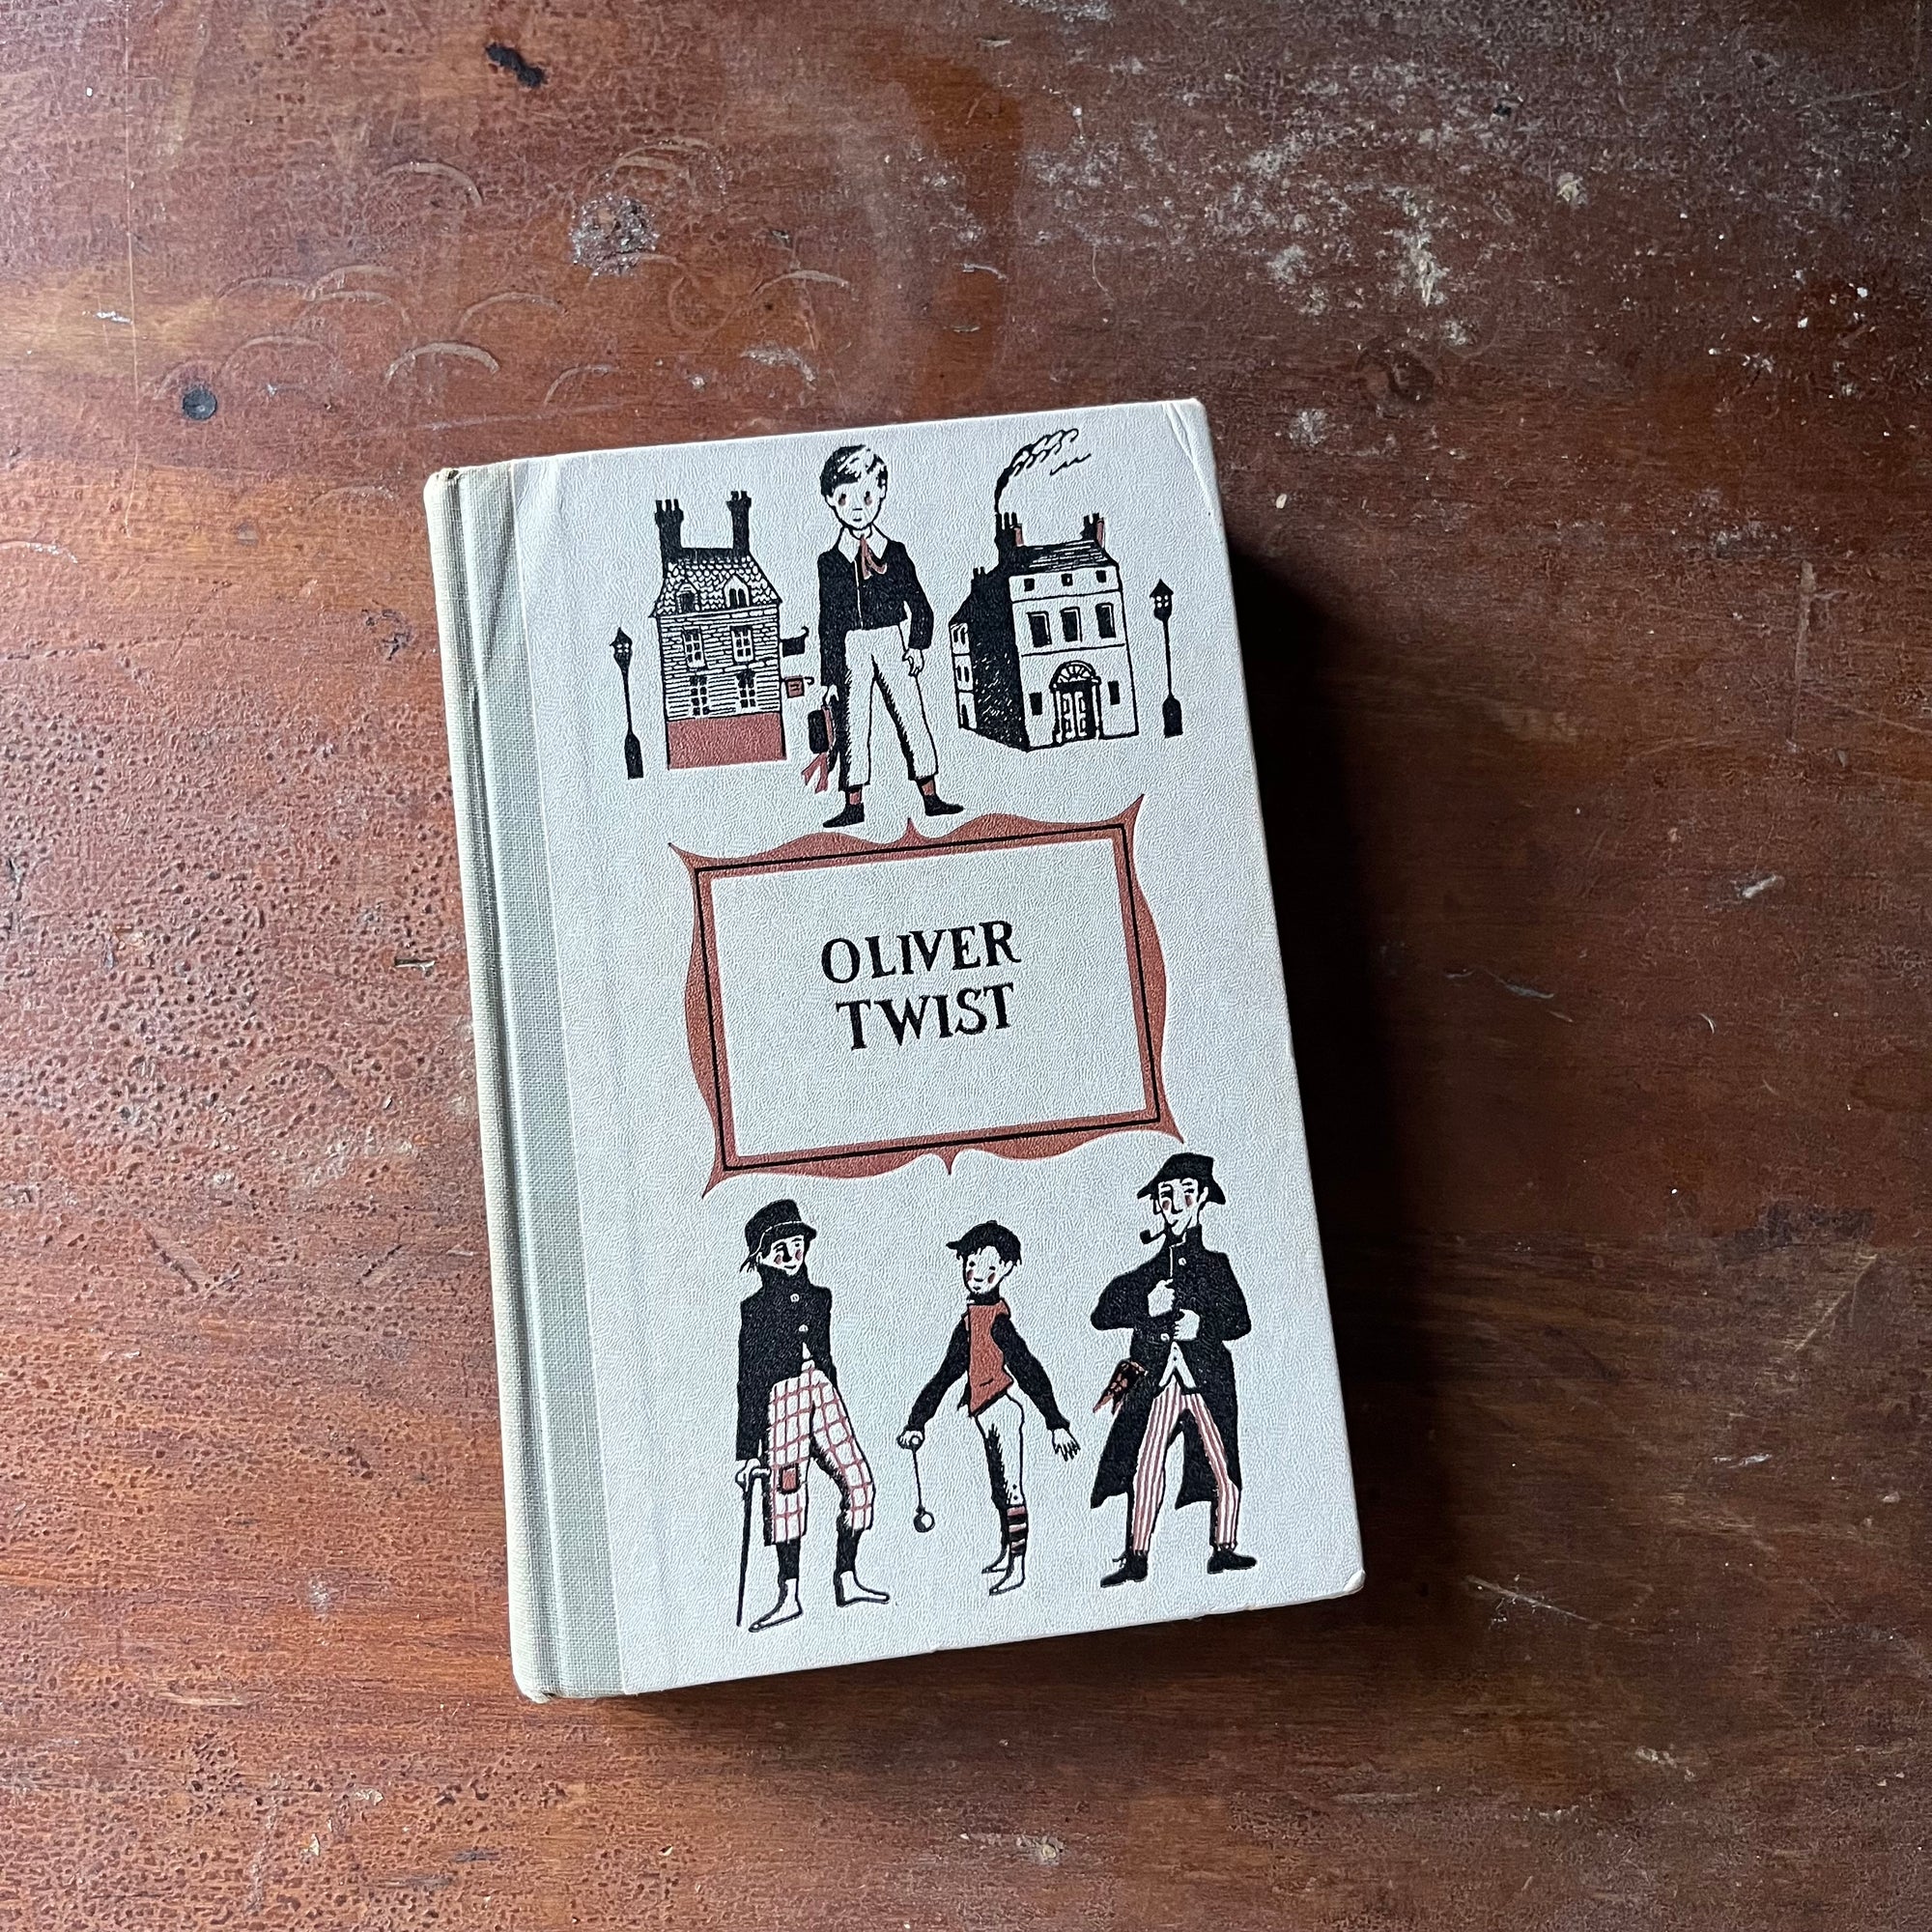 Junior Deluxe Editions Book, vintage children's chapter book - Oliver Twist written by Charles Dickens with illustrations by Lawrence Beall Smith - view of the embossed front cover